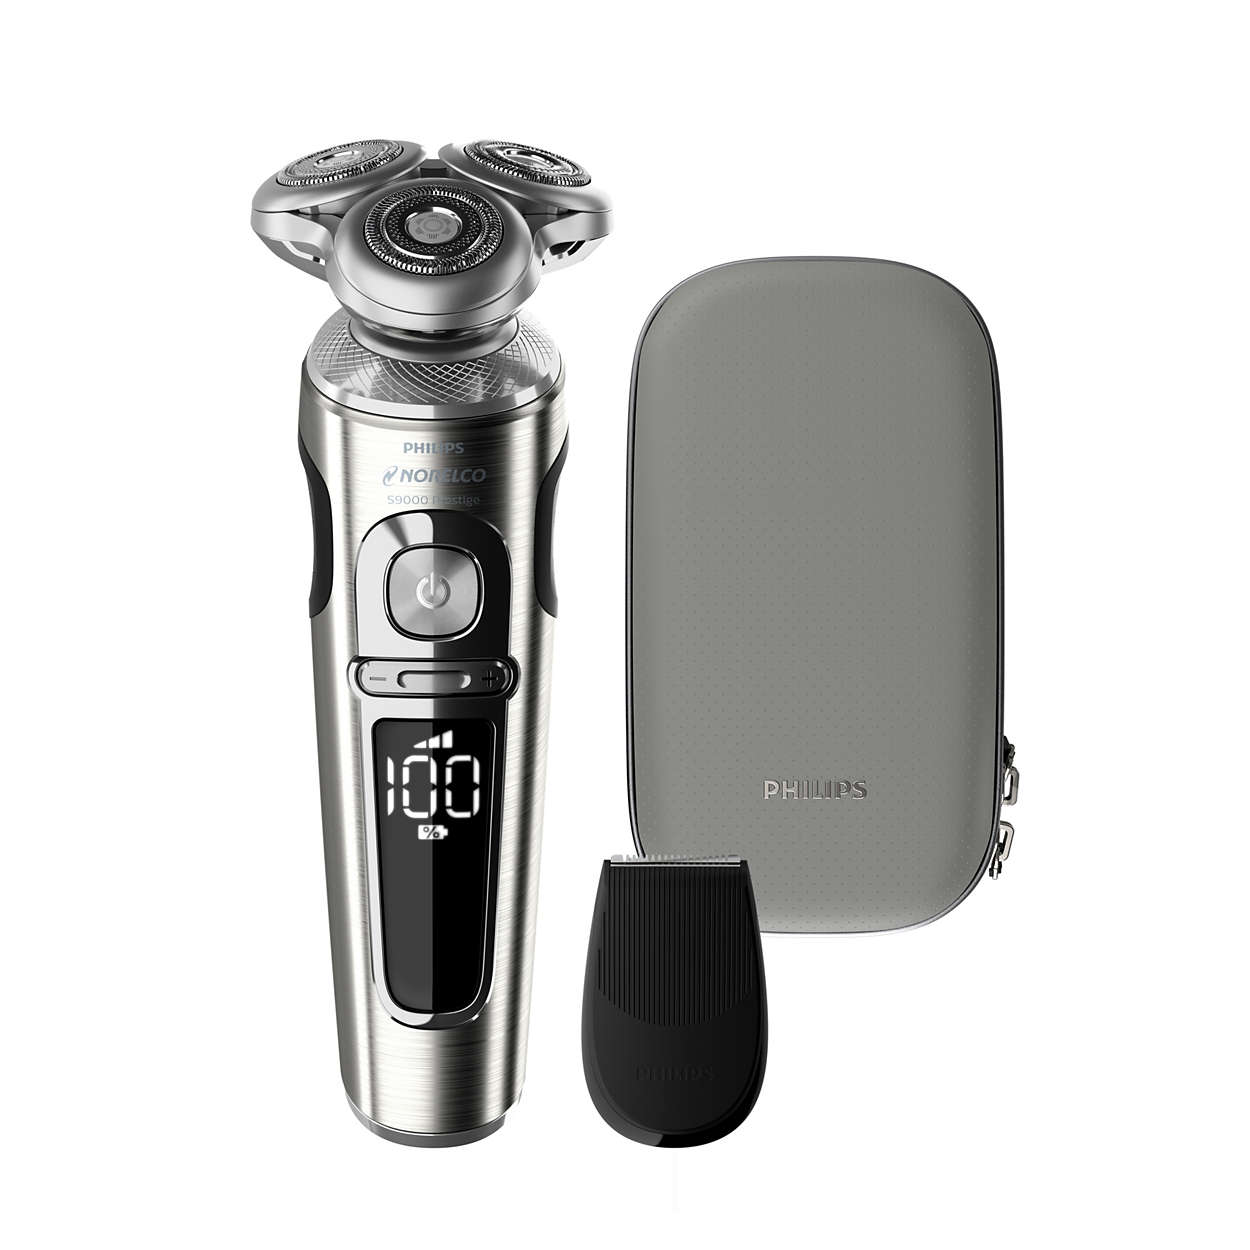 Experience the world's closest electric shave